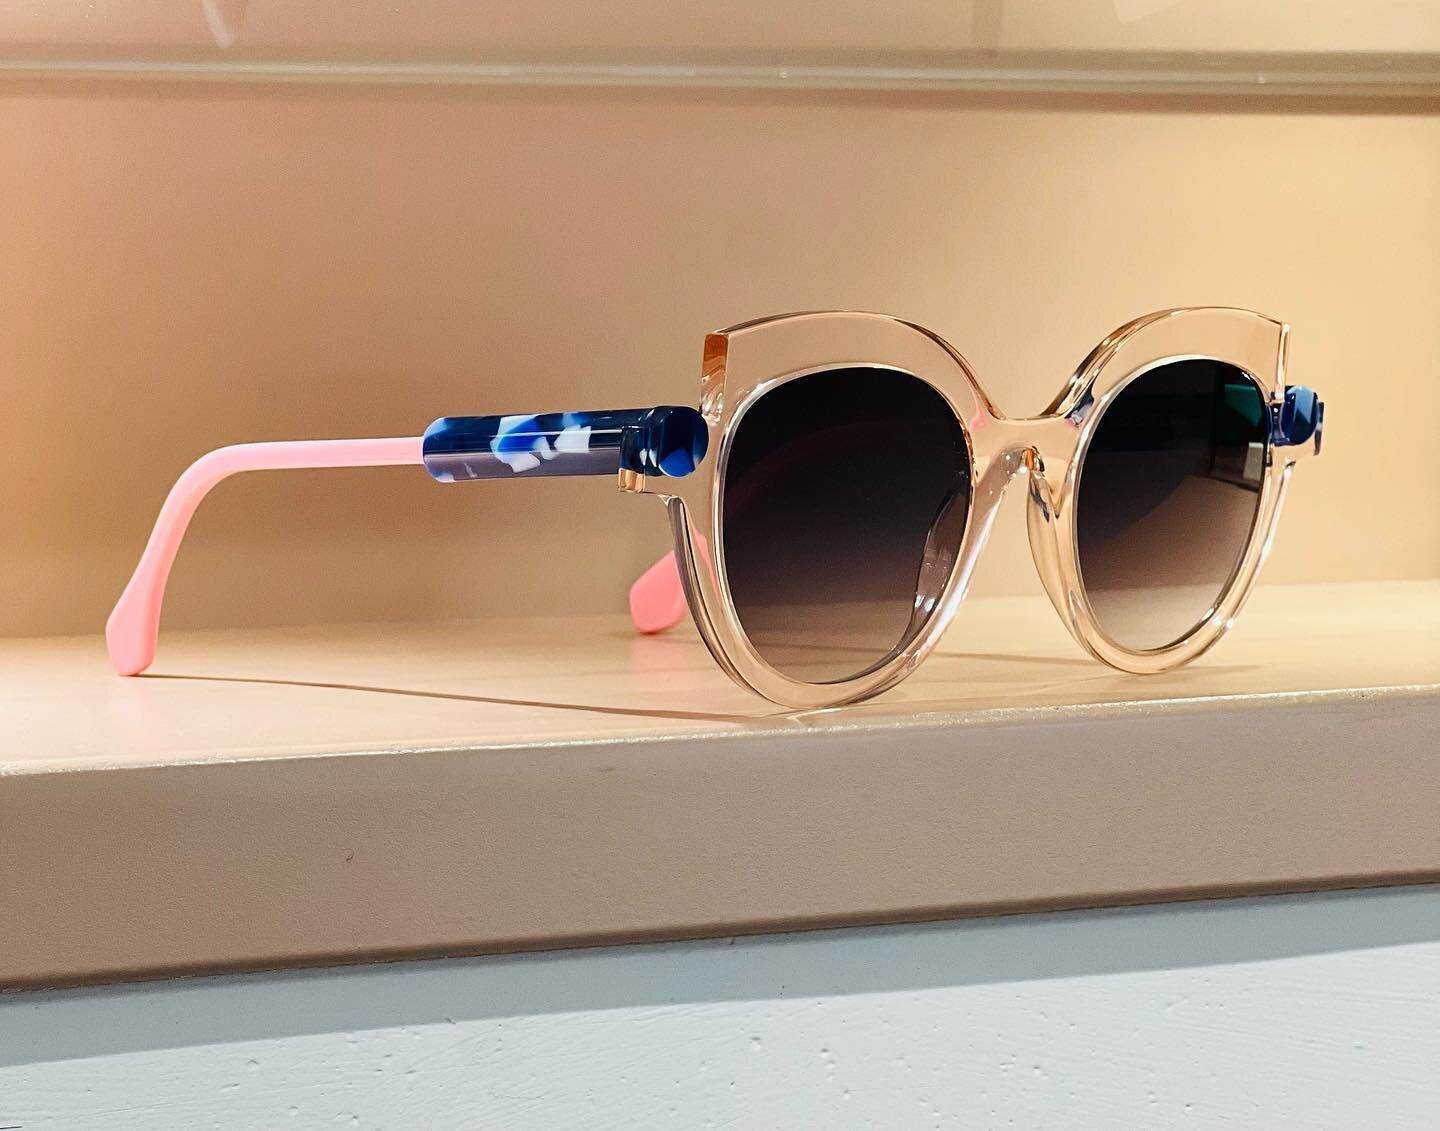 Exceptional pair of sunglasses from @faceaface_paris &mdash;- the SOTSAS 1. The sun is out, give your sunglass wardrobe a Summer edit at EDNEY &amp; EDNEY. #sunglasses #sunglassesfashion #summeredit #sunglasswardrobe #faceaface #independentopticians 